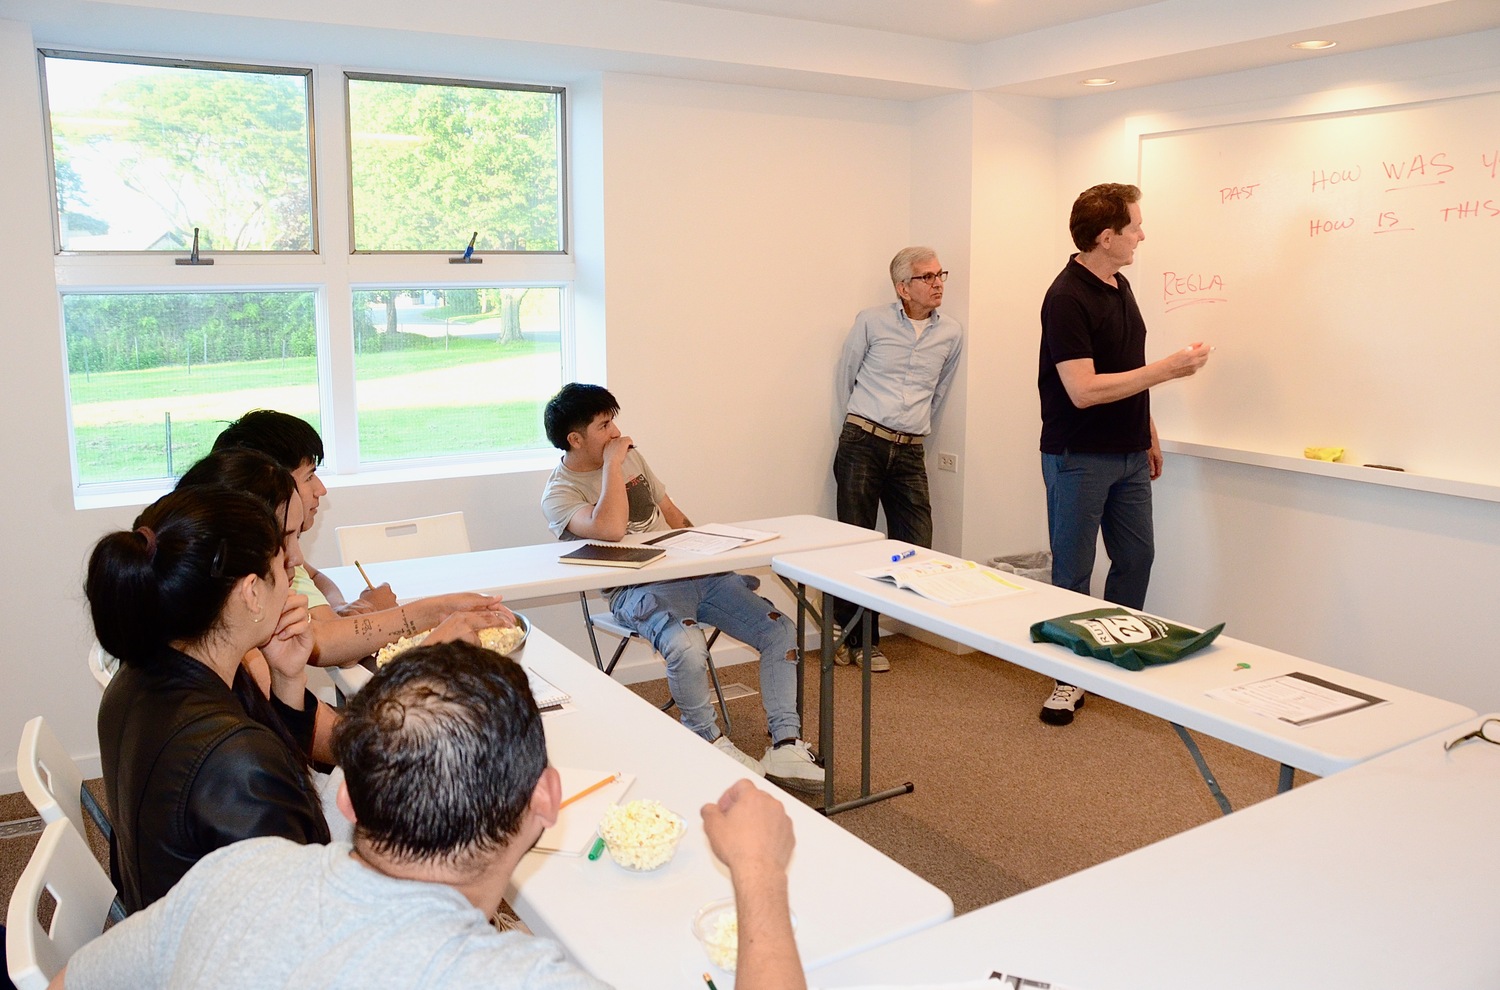 Students in class on a recent Tuesday evening with instructors Richard D'Atille (left) and David Frye (right). KYRIL BROMLEY